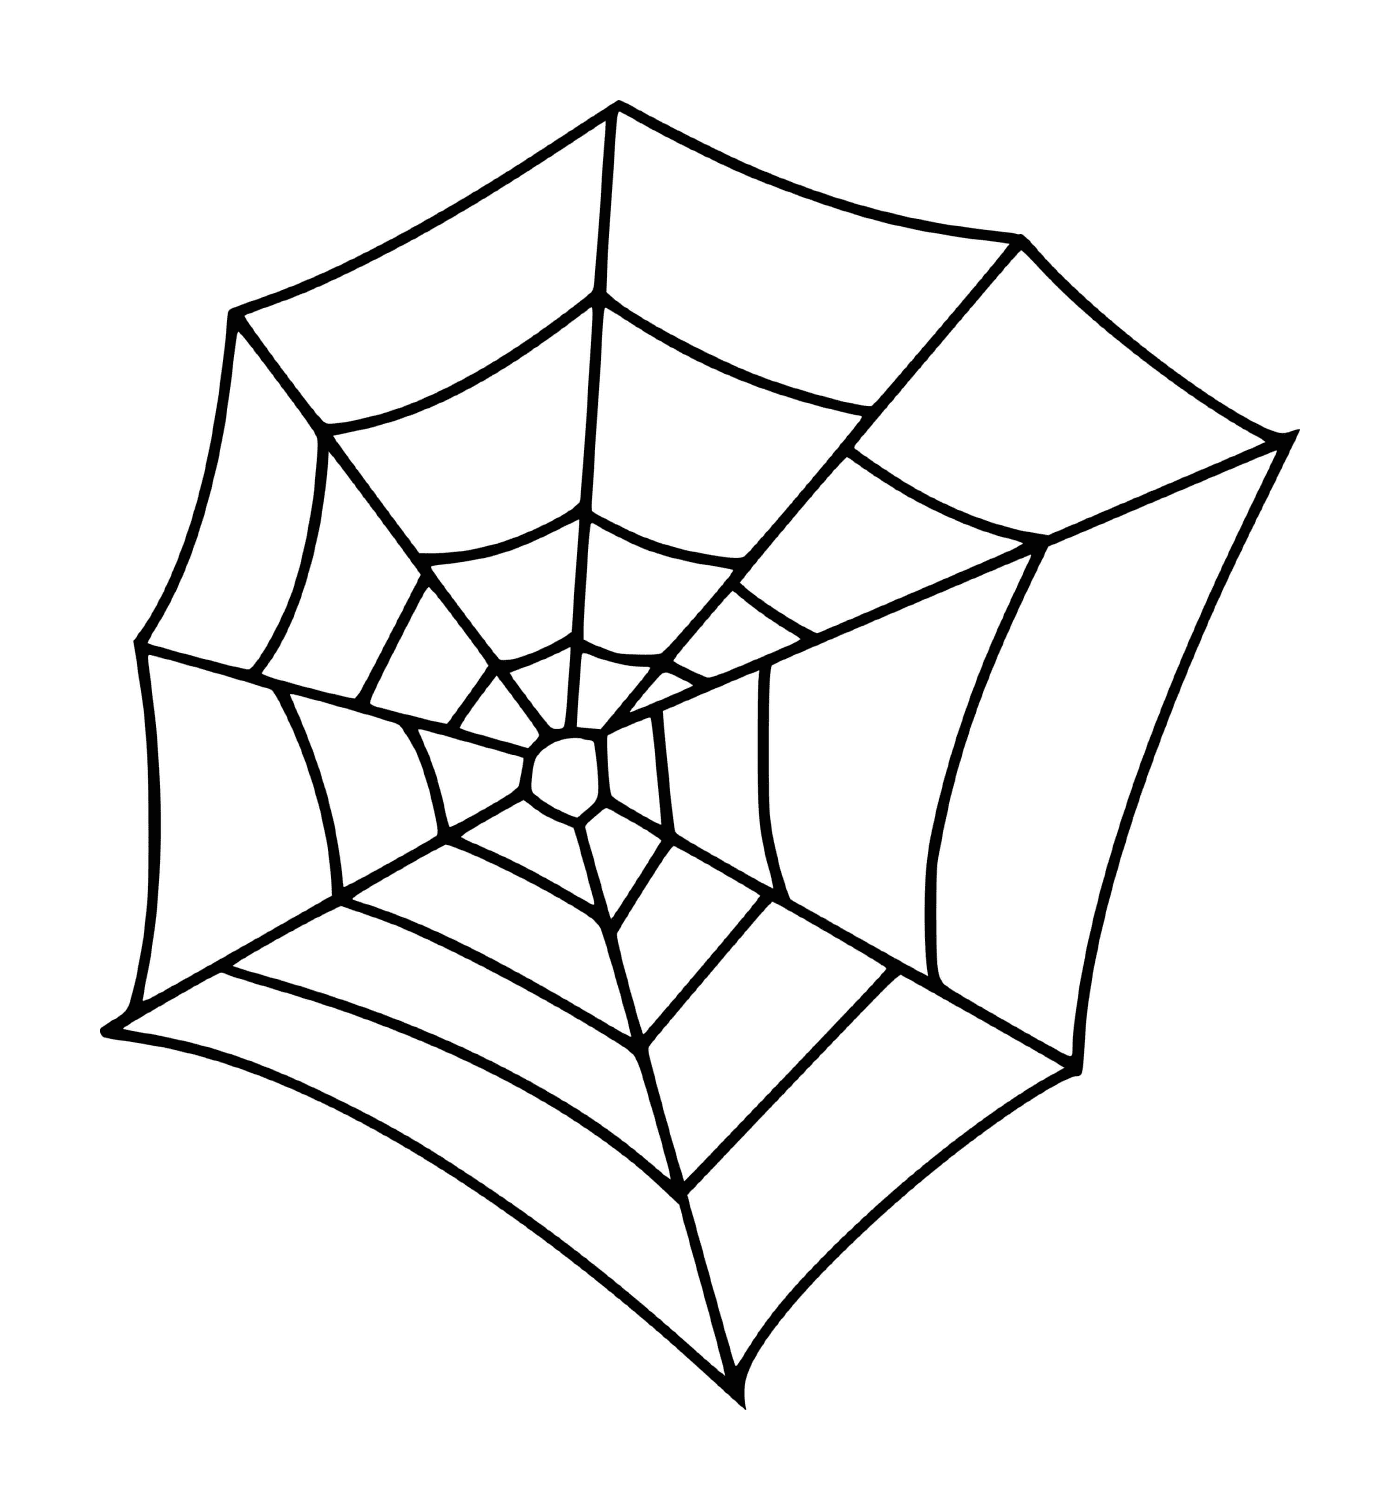  An easy spider web 